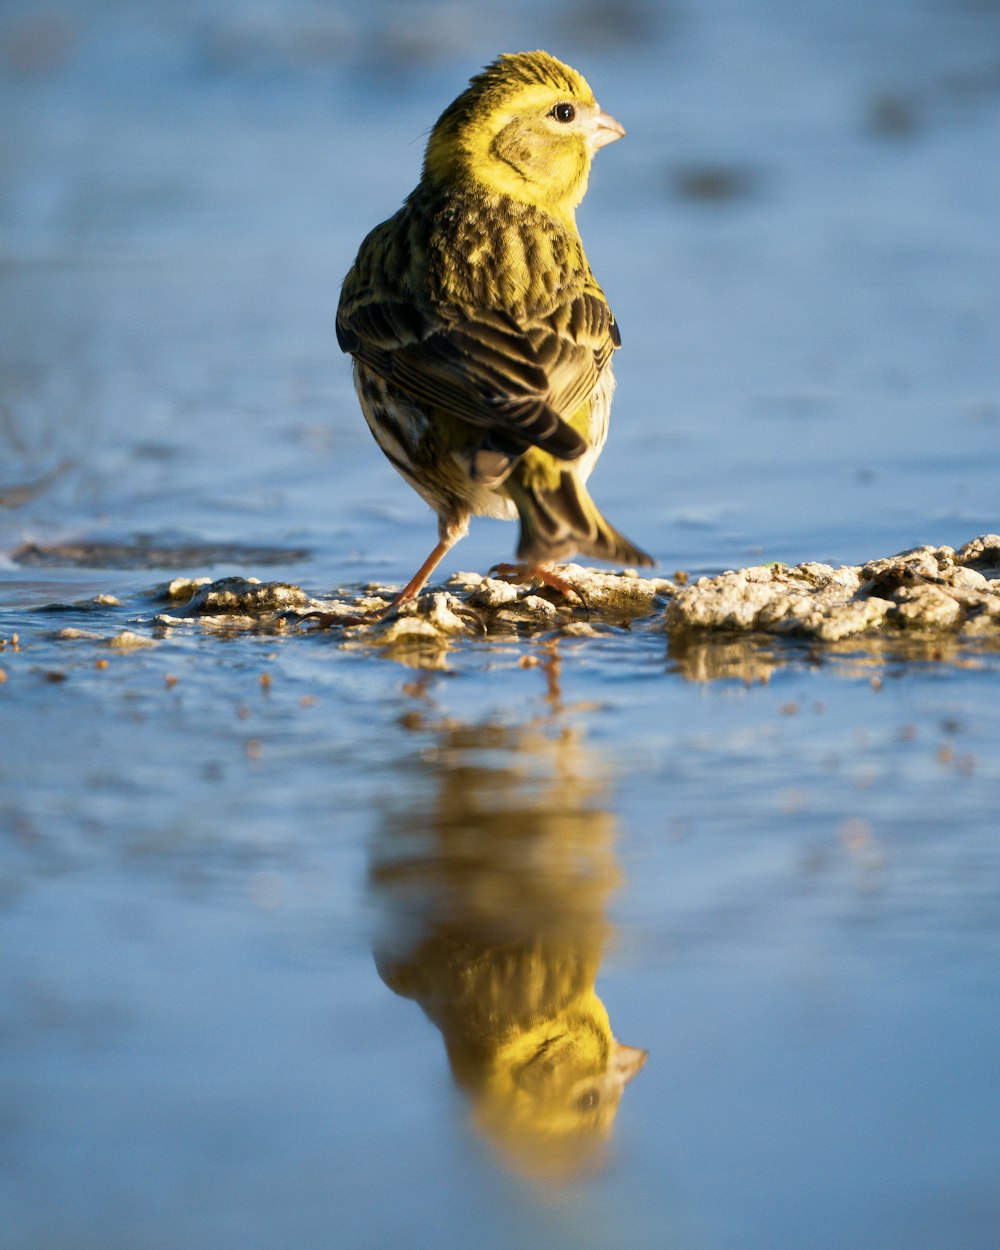 a small bird standing on a rock in the water